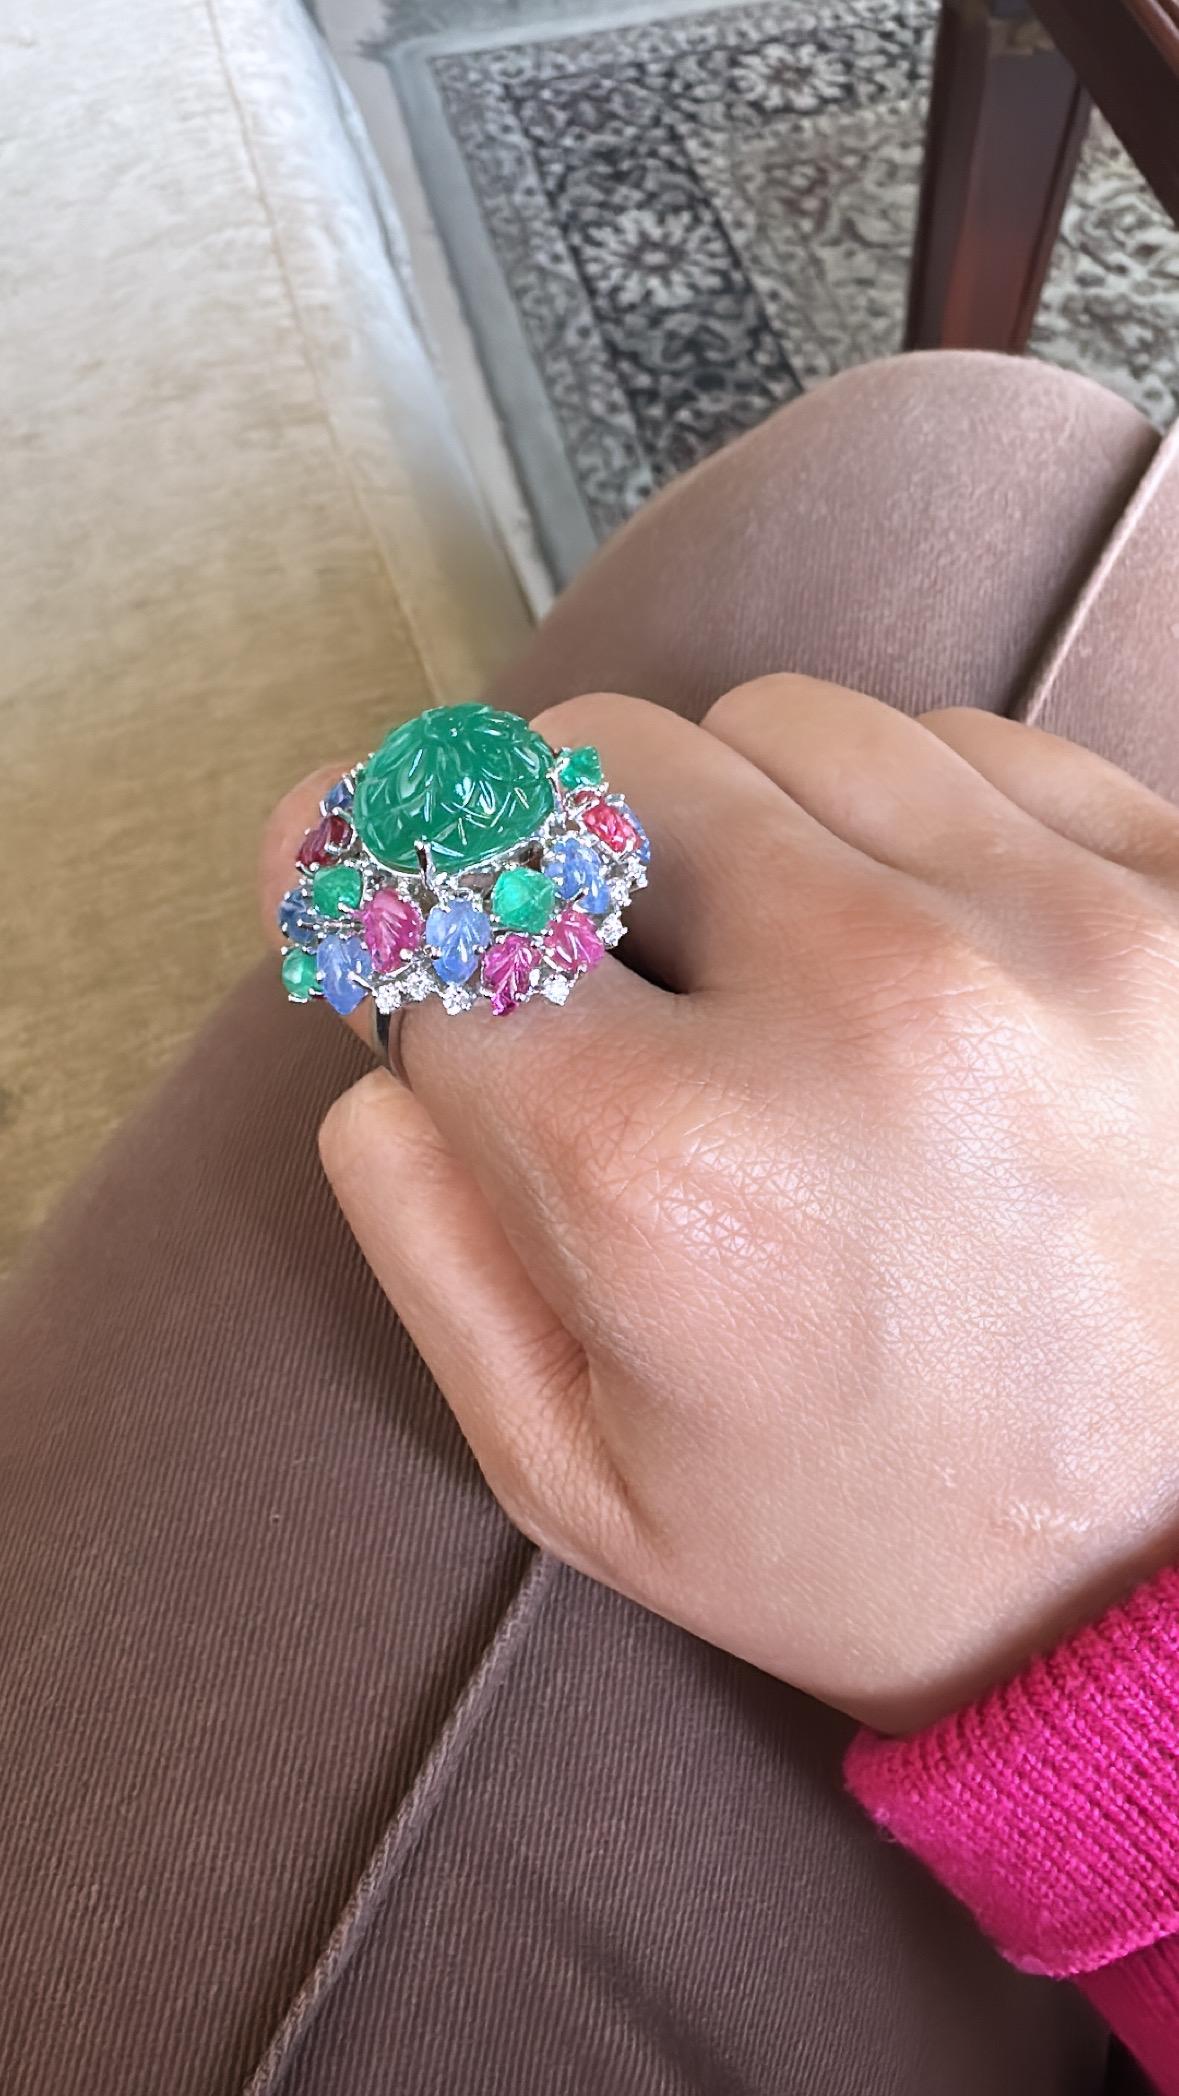 A very beautiful, Art deco style Emerald, Ruby & Blue Sapphire Tutti Frutti Cocktail Ring set in 18K Gold & Diamonds. The combined weight of the carved Emerald and sugarloaf cabochon  is 11.42 carats. The Emerald is completely natural, without any